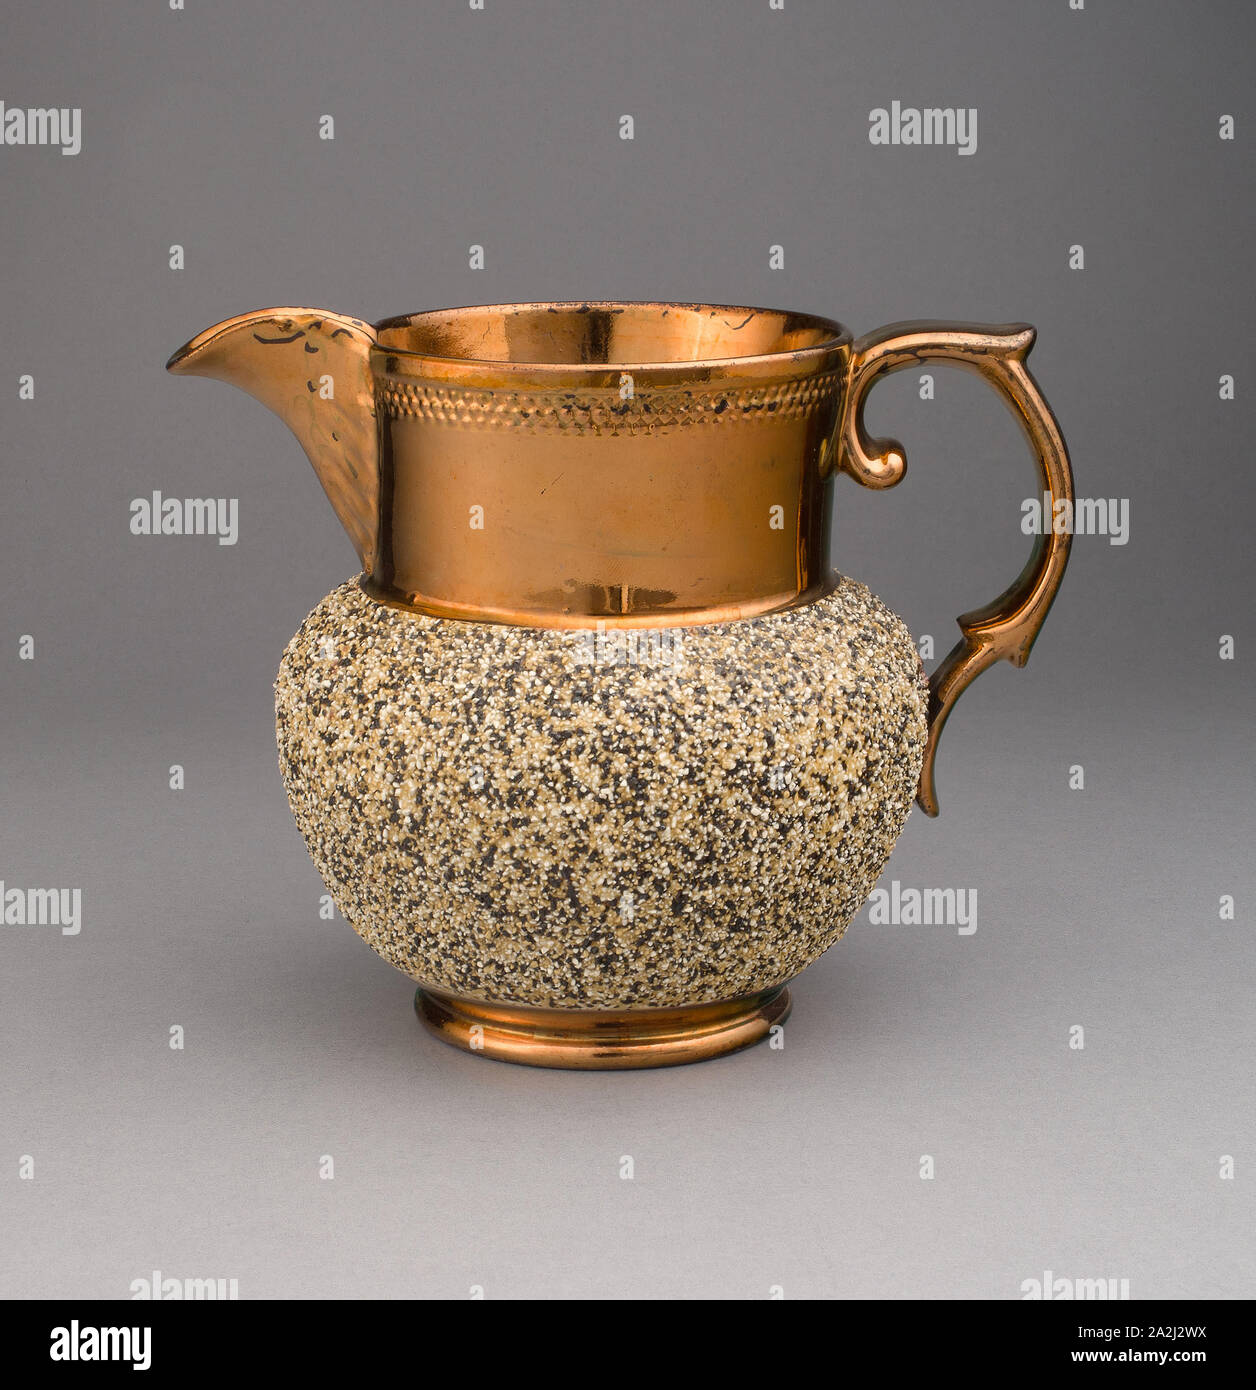 Pitcher, 1810/20, England, Staffordshire, Staffordshire, Lead-glazed earthenware with lustre decoration, 15.2 × 14 cm (6 × 5 1/2 in Stock Photo